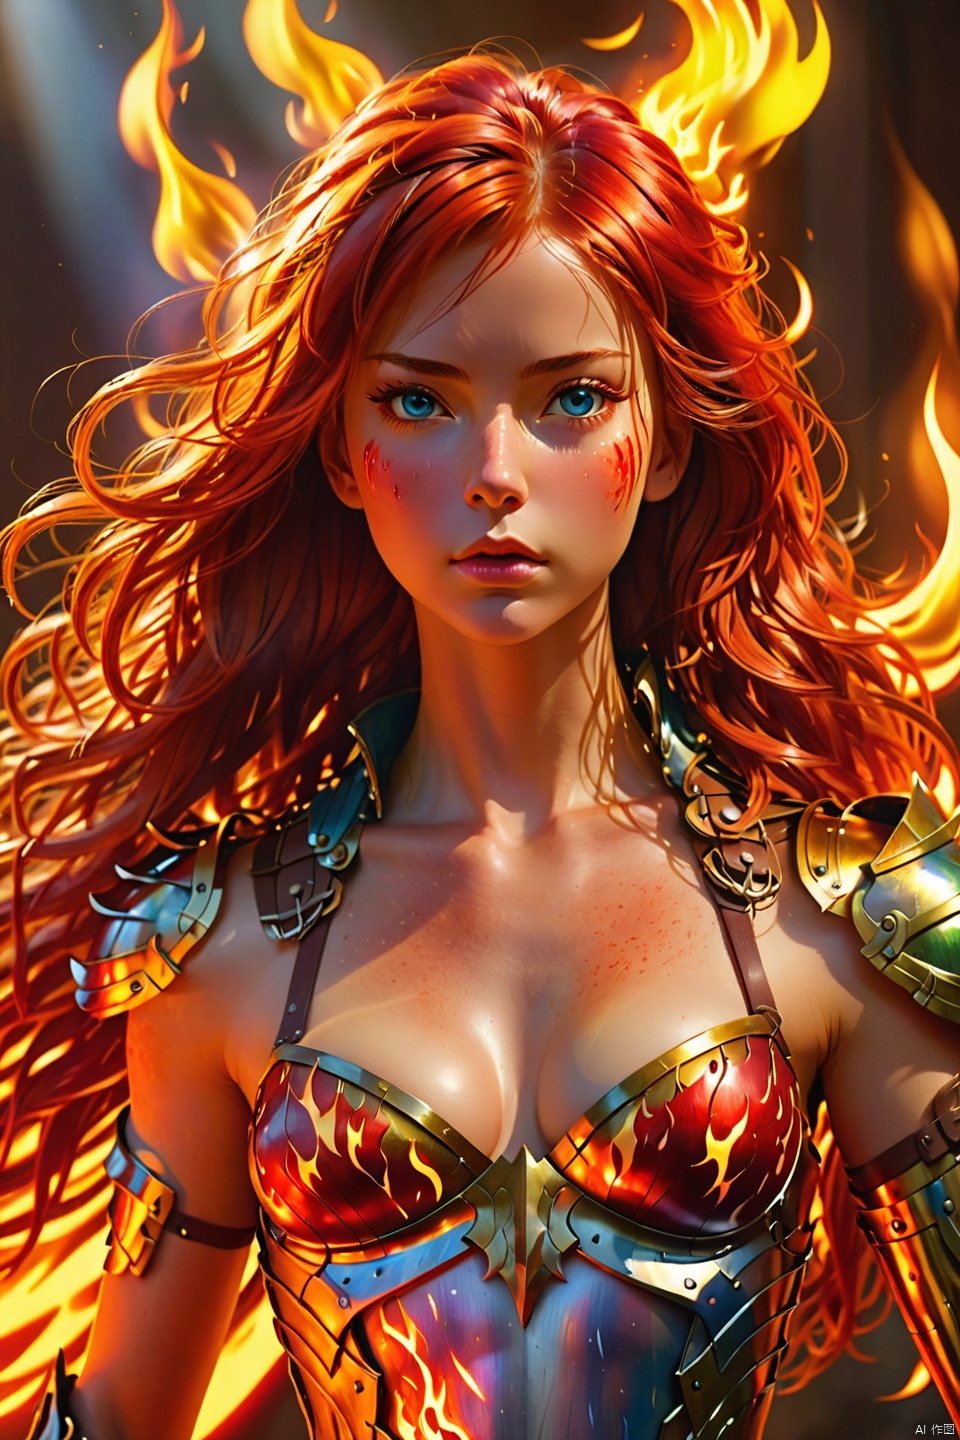 (Flame, blazing flames: 1), (body burning flames: 1.2), (magical flames: 1.2), (numerous flames floating around the girl), (best quality), (masterpiece), (super detail), super detail CG, (illustration), (light of detail), (an extremely exquisite and beautiful), girl, solo, (upper body,), (cute face), expressionless, (beautiful detail eyes), full breasts, (midchest: 1.2) red feathers, (vertical pupils: 1.2) red hair, shiny hair, five colors and six colors of hair, [Armored Woman] Armor decoration emits red flames, [suspended flames], emitting flames to decorate hair, depth of field, (firelight), whole body,
Transparent and semi transparent material,
Lower abdomen,
Navel,
Flames in front of you,
Flame in front of the camera,
